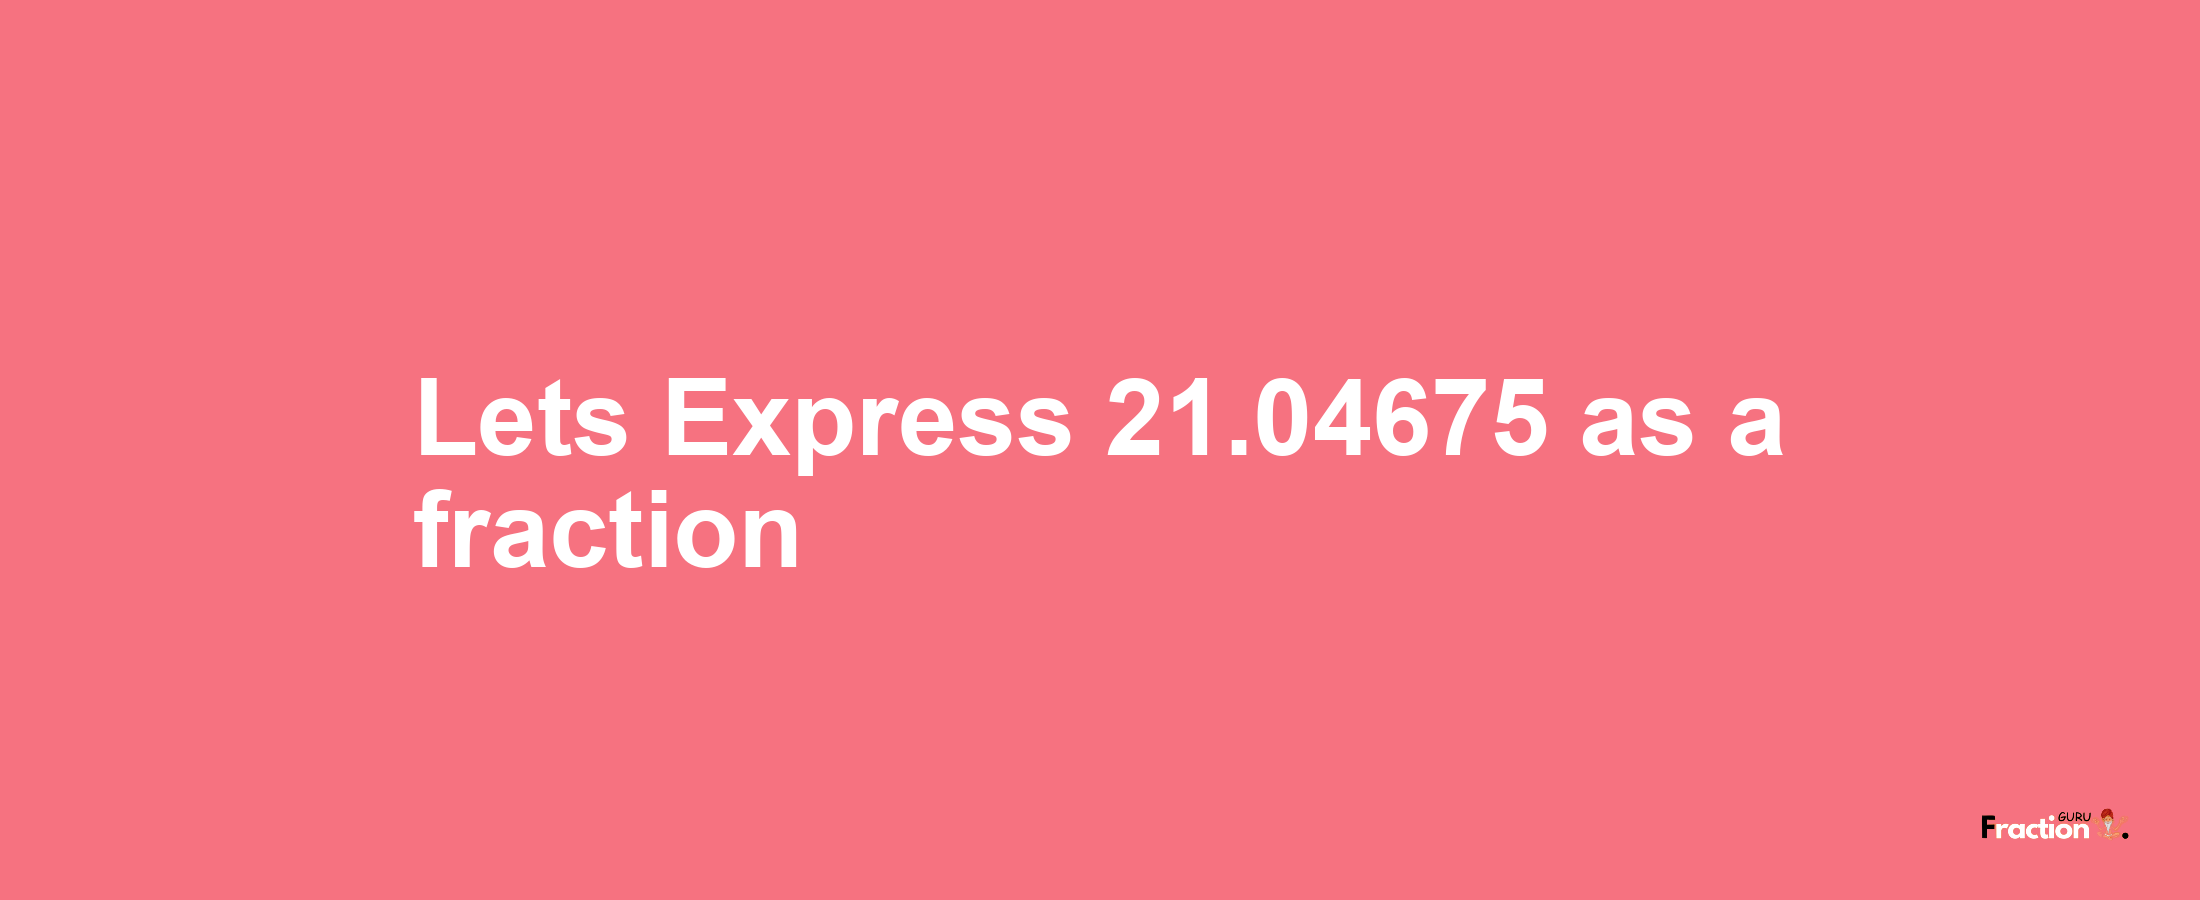 Lets Express 21.04675 as afraction